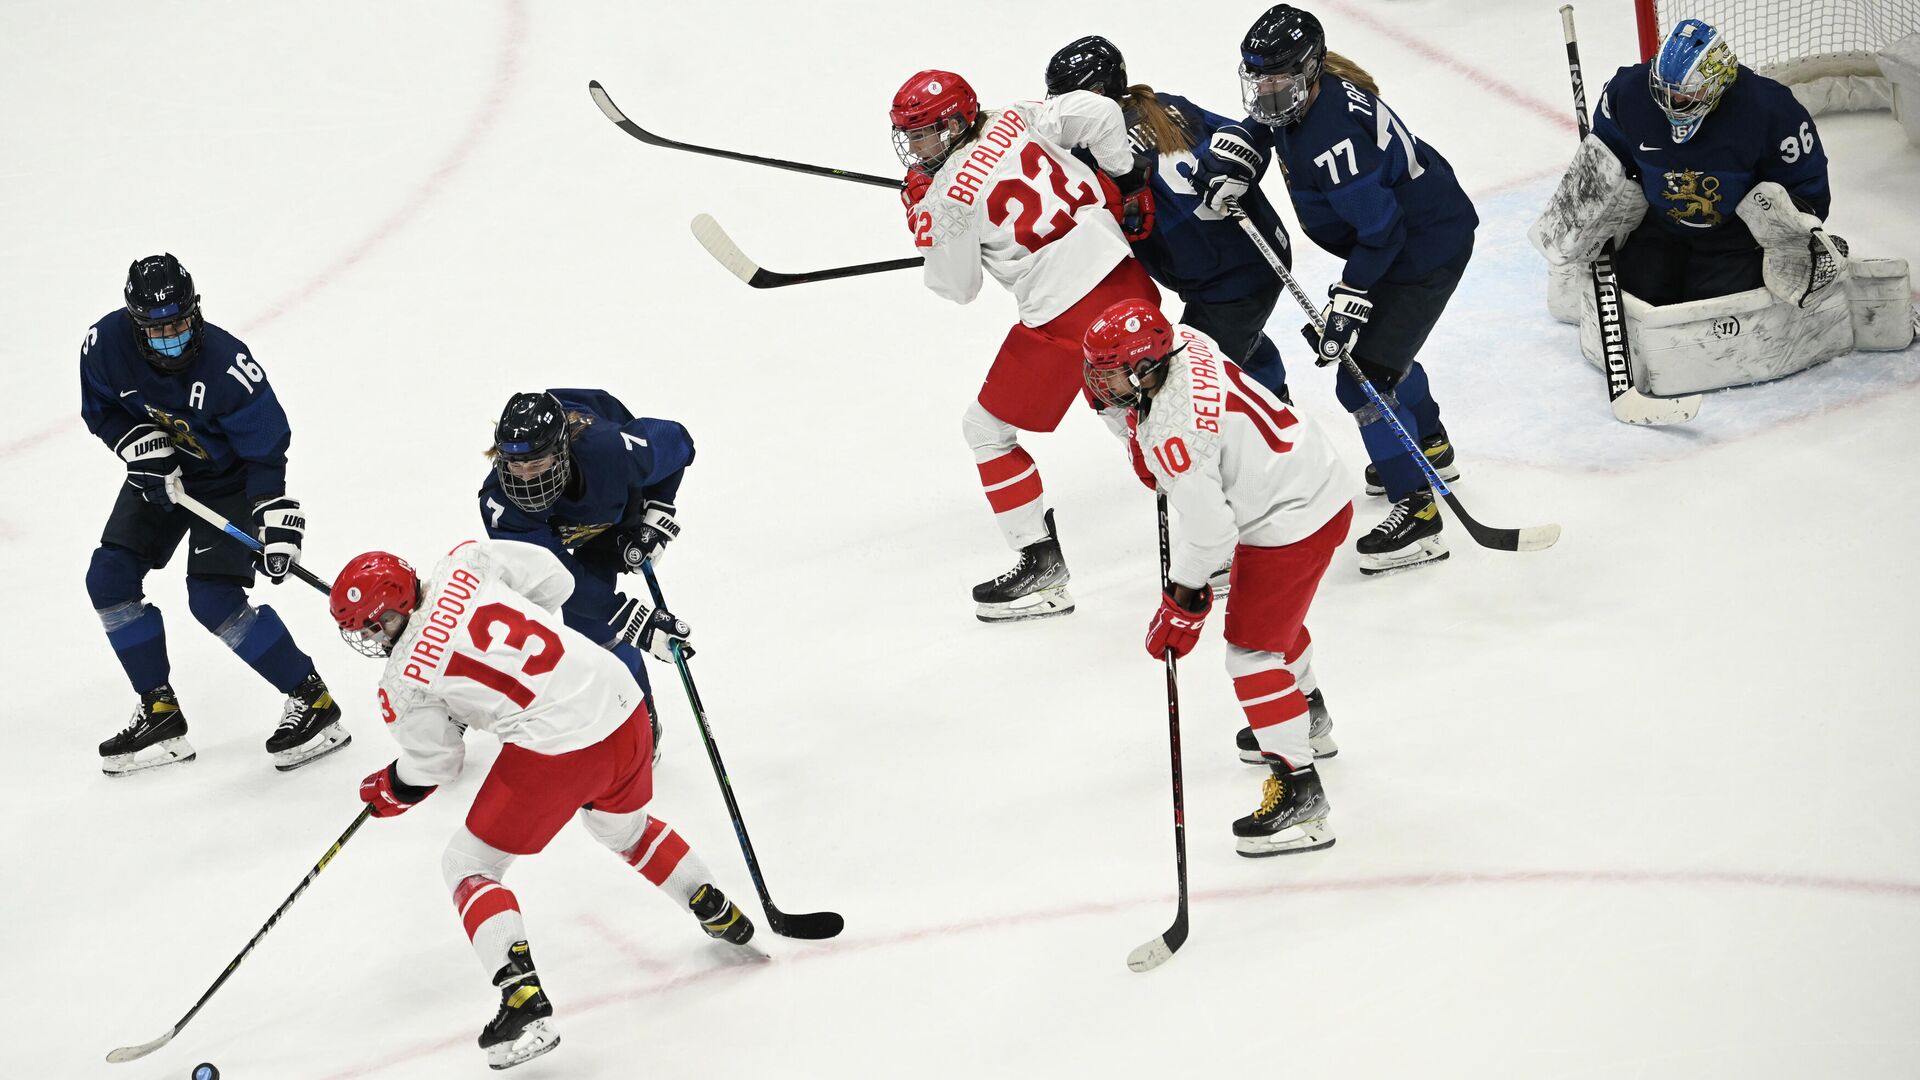 (From L) Finland's Petra Nieminen, Russian Olympic Commitee's Nina Pirogova and Finland's Sanni Rantala go for the puck during the women's preliminary round group A match of the Beijing 2022 Winter Olympic Games ice hockey competition between Finland and players of Russia's Olympic Committee, at the National Indoor Stadium in Beijing on February 8, 2022. (Photo by Anne-Christine POUJOULAT / AFP) - РИА Новости, 1920, 08.02.2022